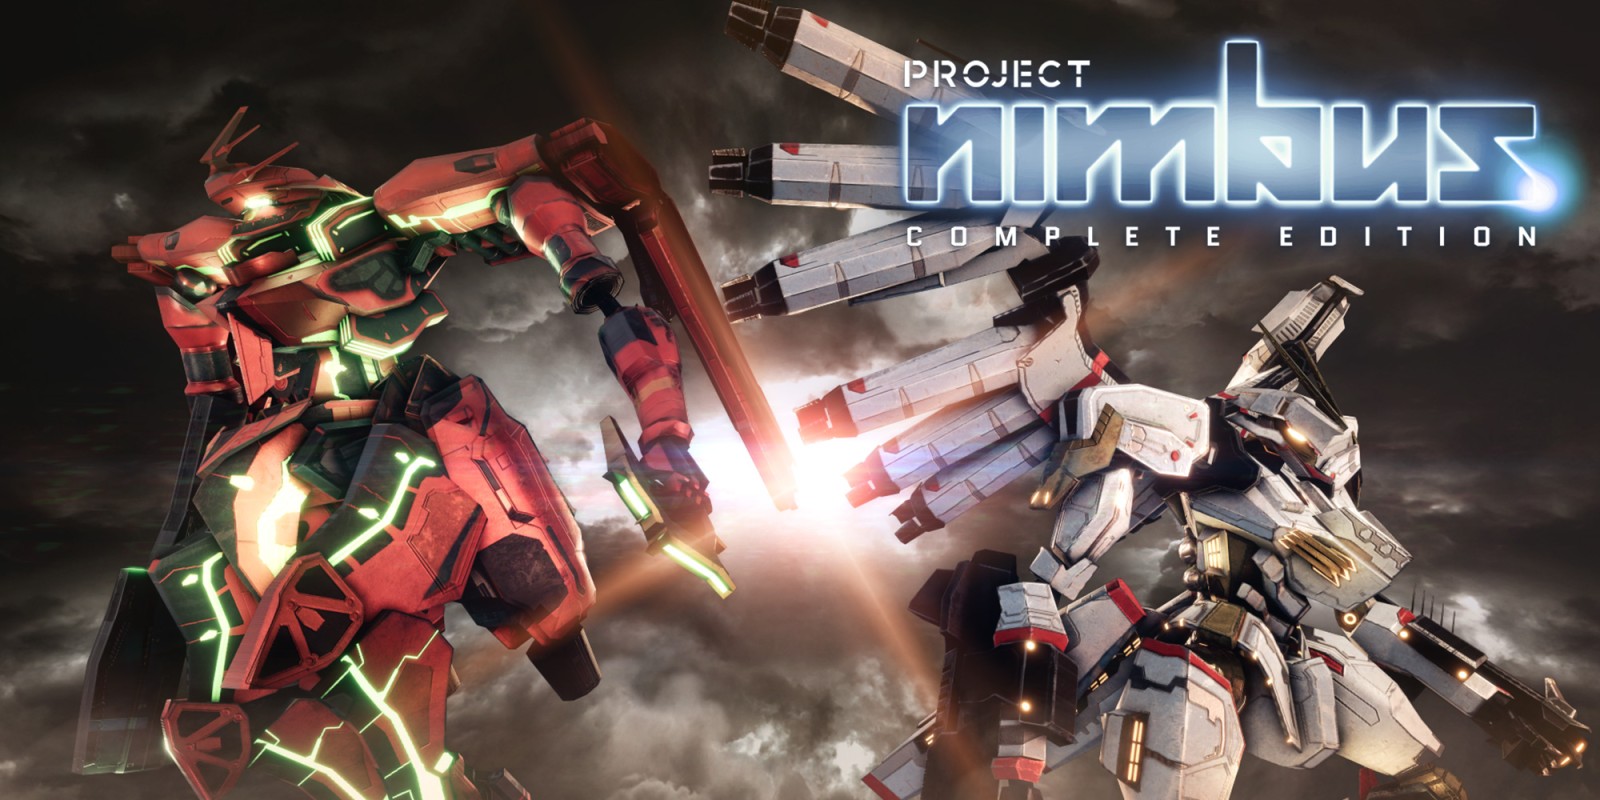 Project Nimbus: Complete Edition – Nintendo Switch Review – Mecha-fight!